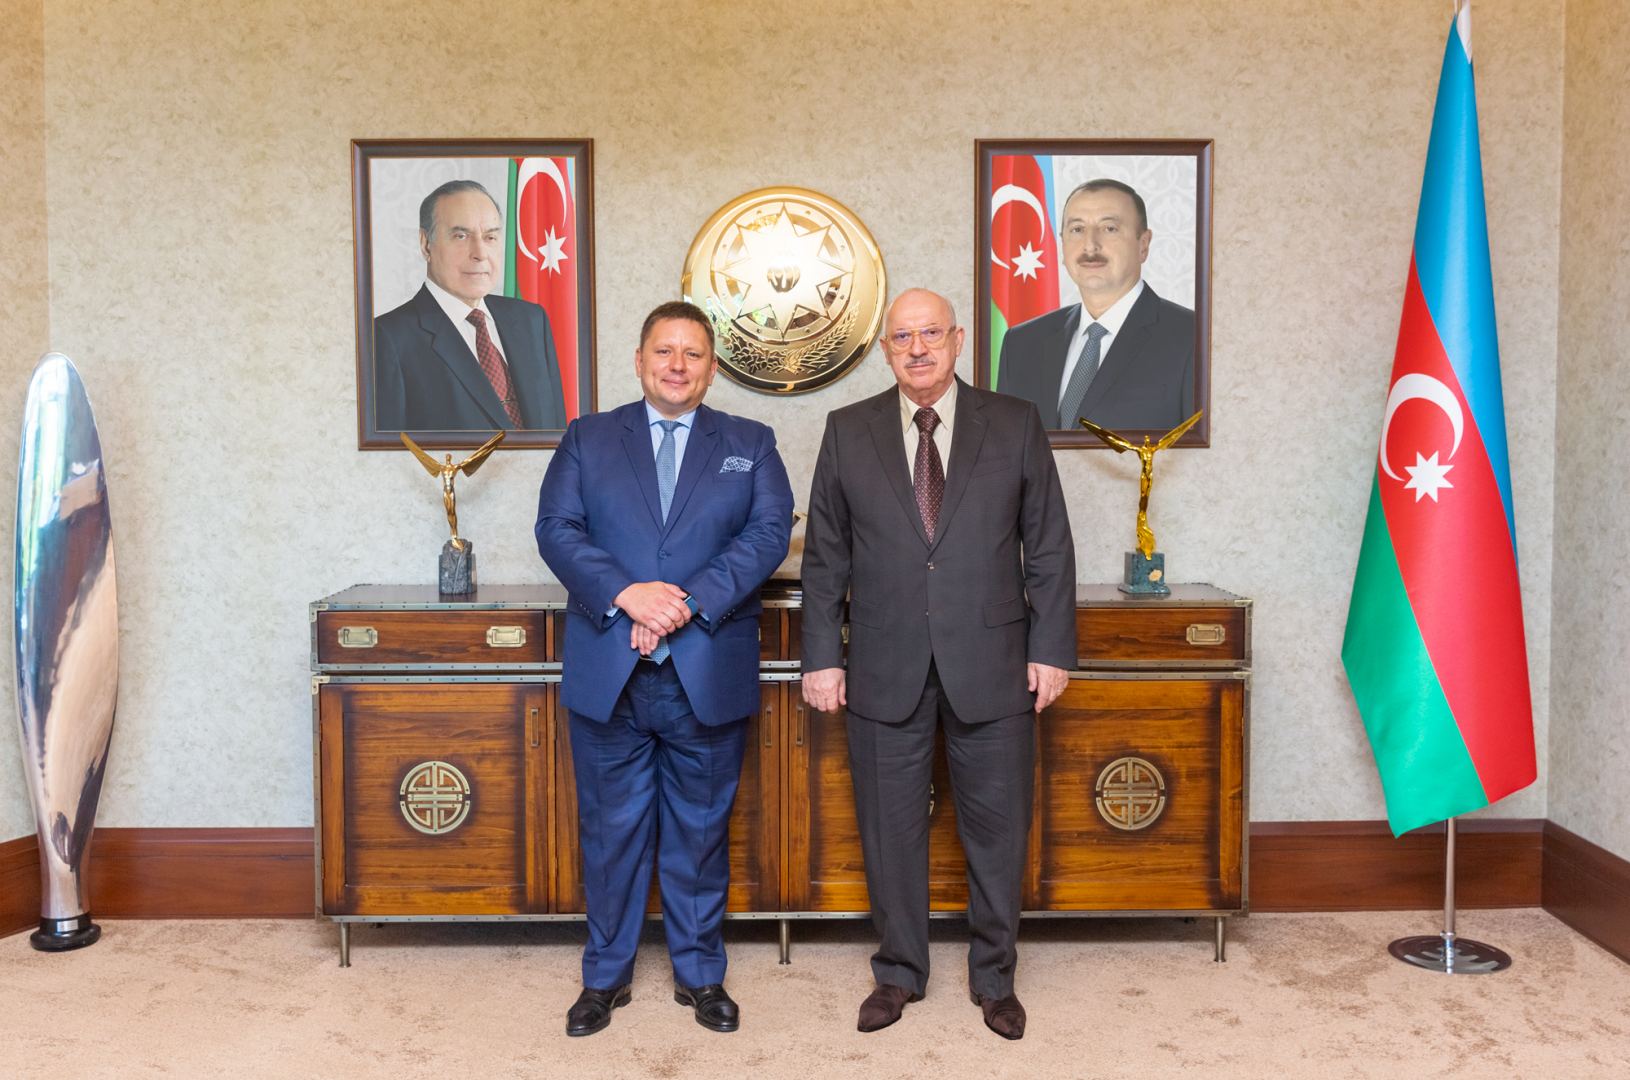 AZAL and LOT expressed satisfaction with fruitful cooperation (PHOTO)